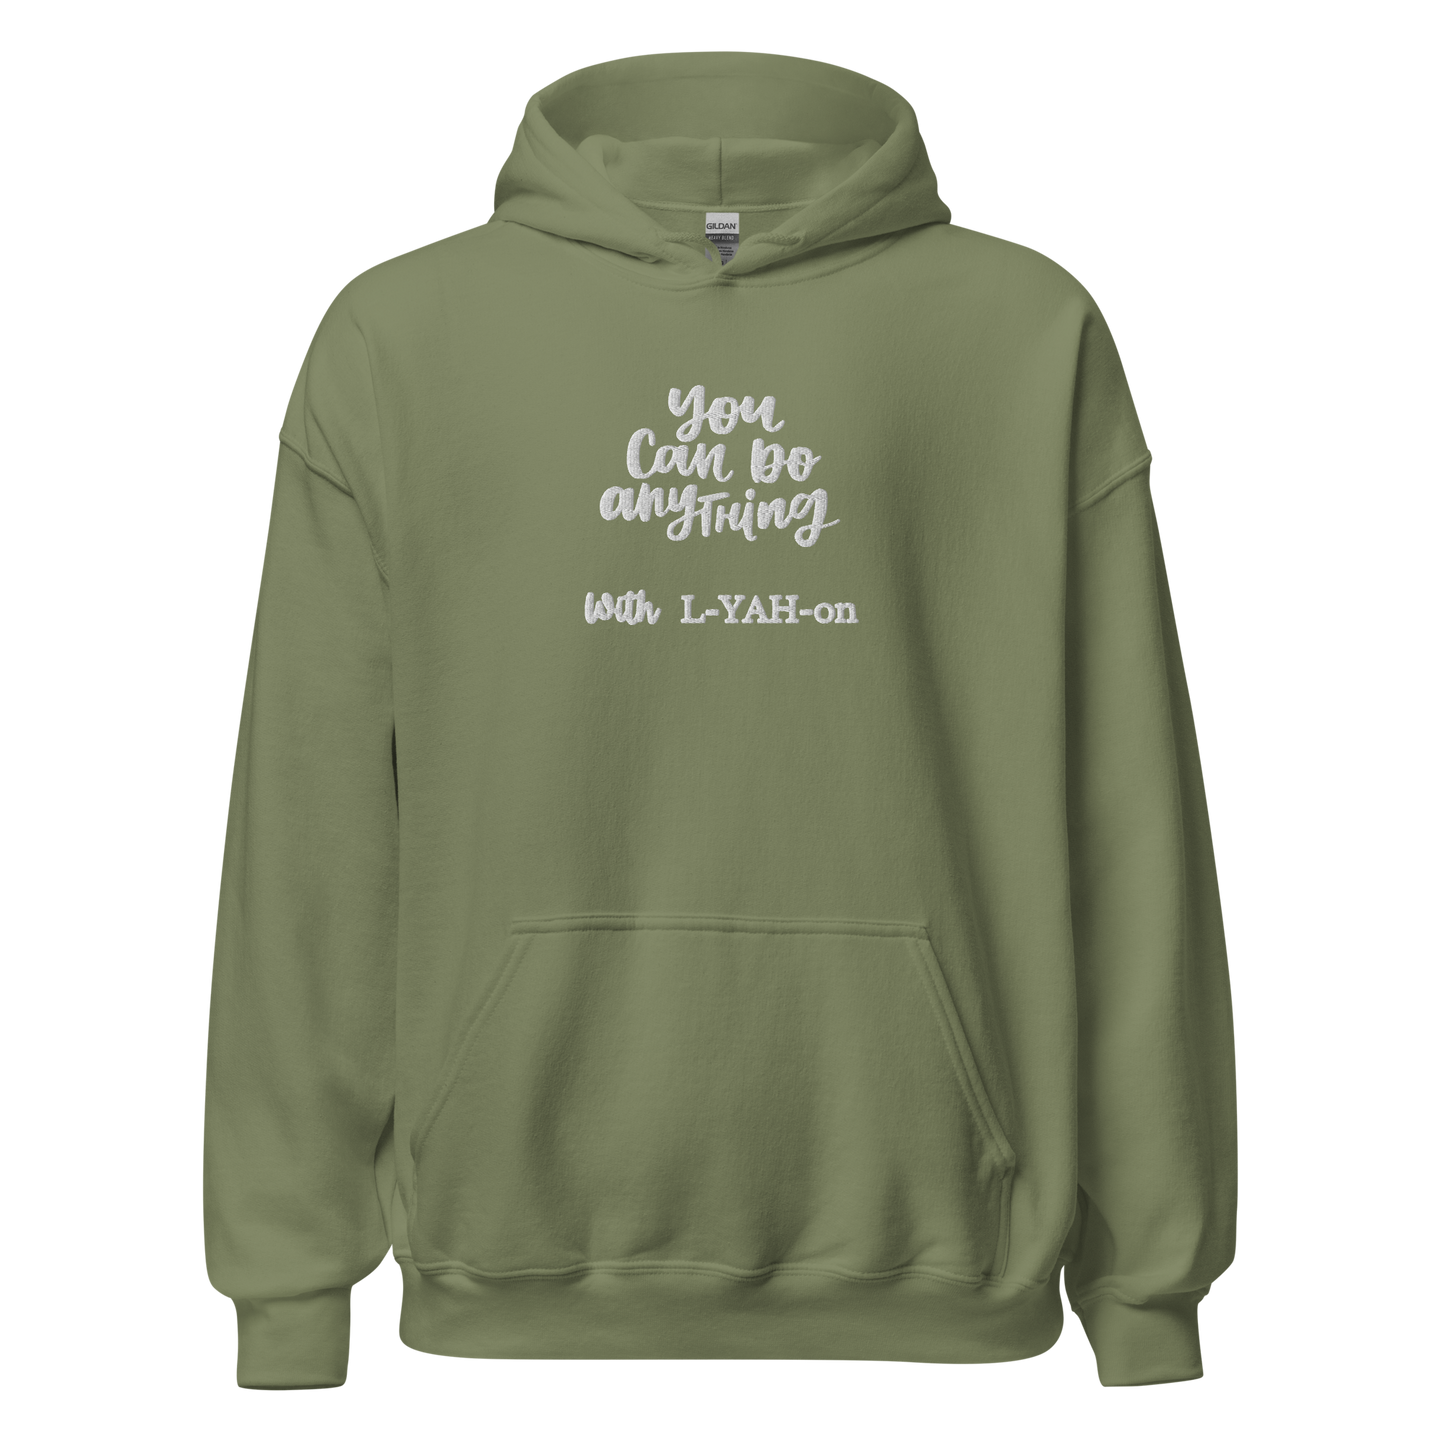 You Can Do Anything with L-YAH-on Hoodie